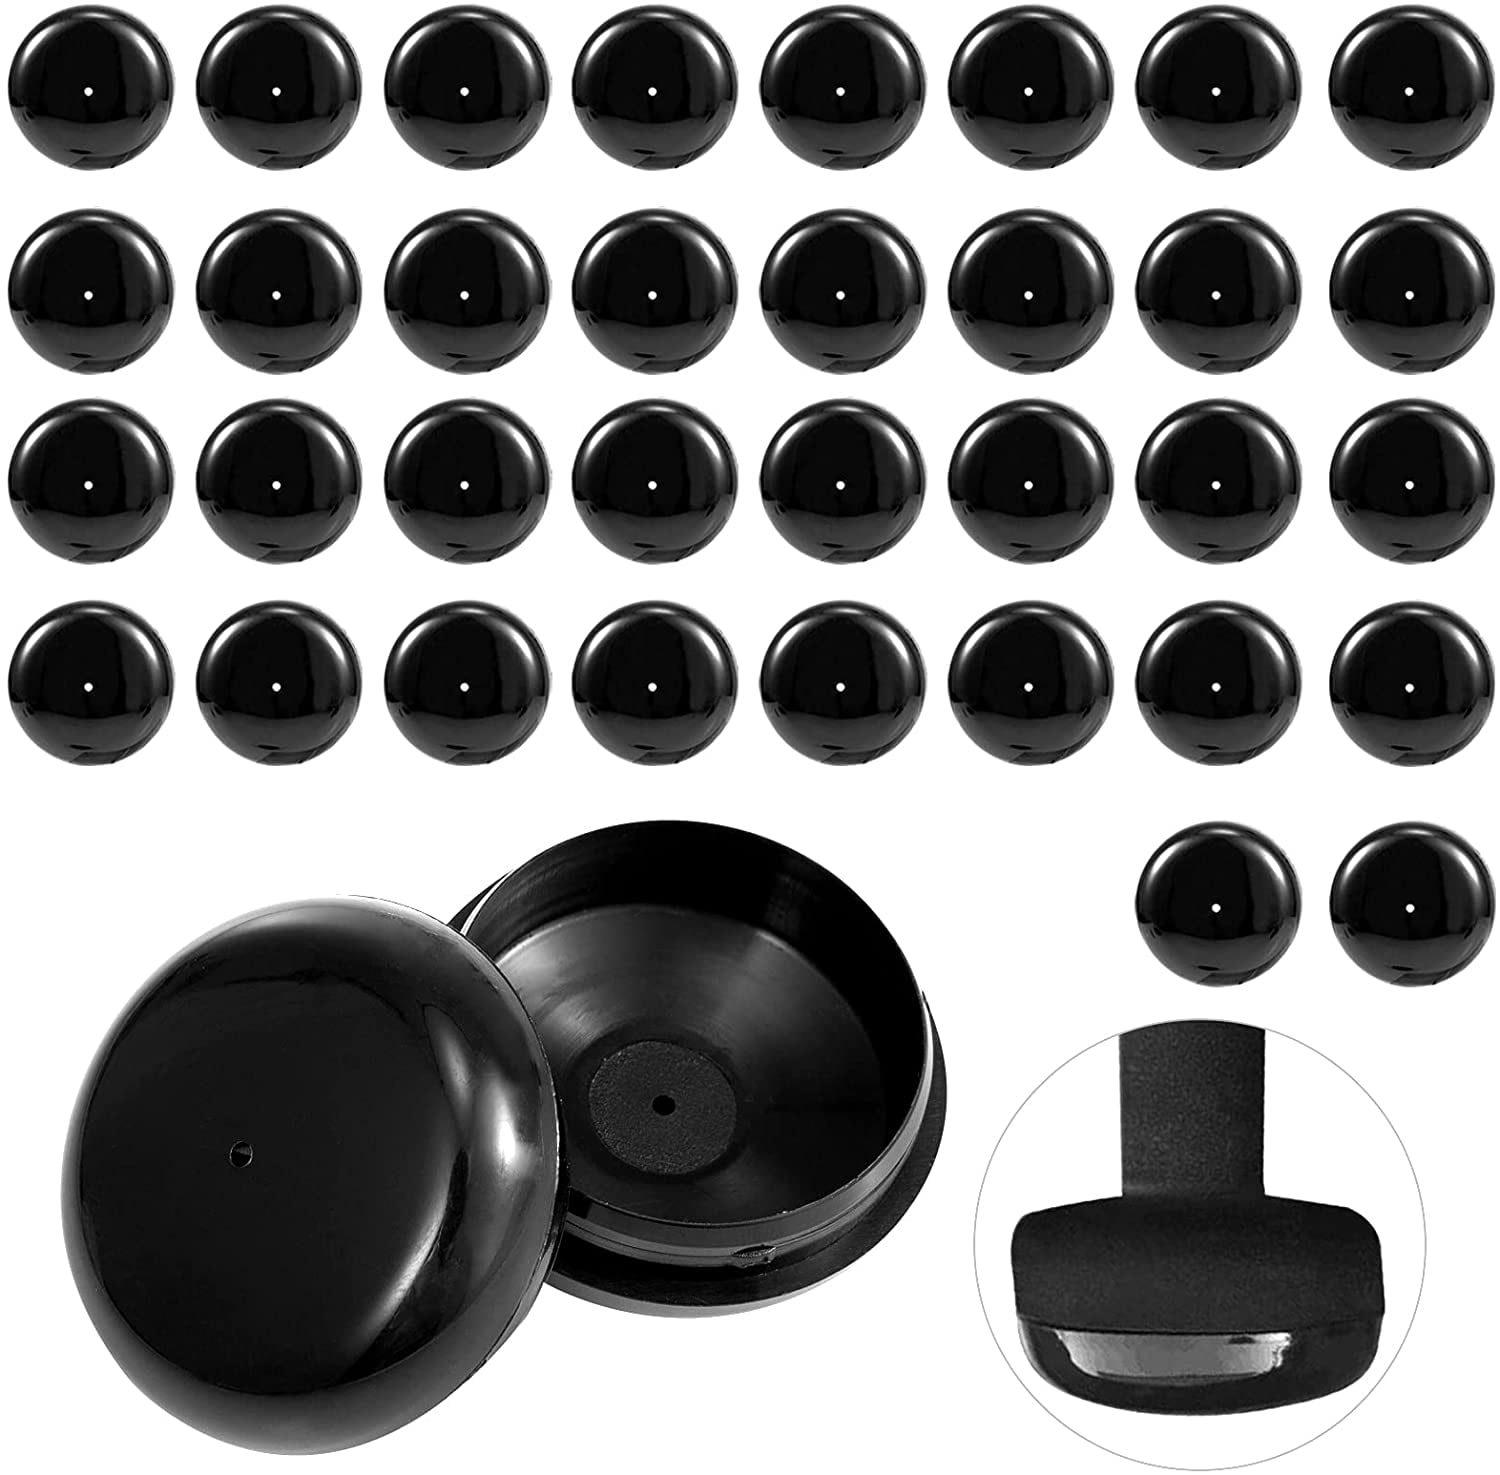 24 Patio Furniture Foot 1.5" Black Deluxe Inserts Glides Caps Cups 1 1/2 Inch 